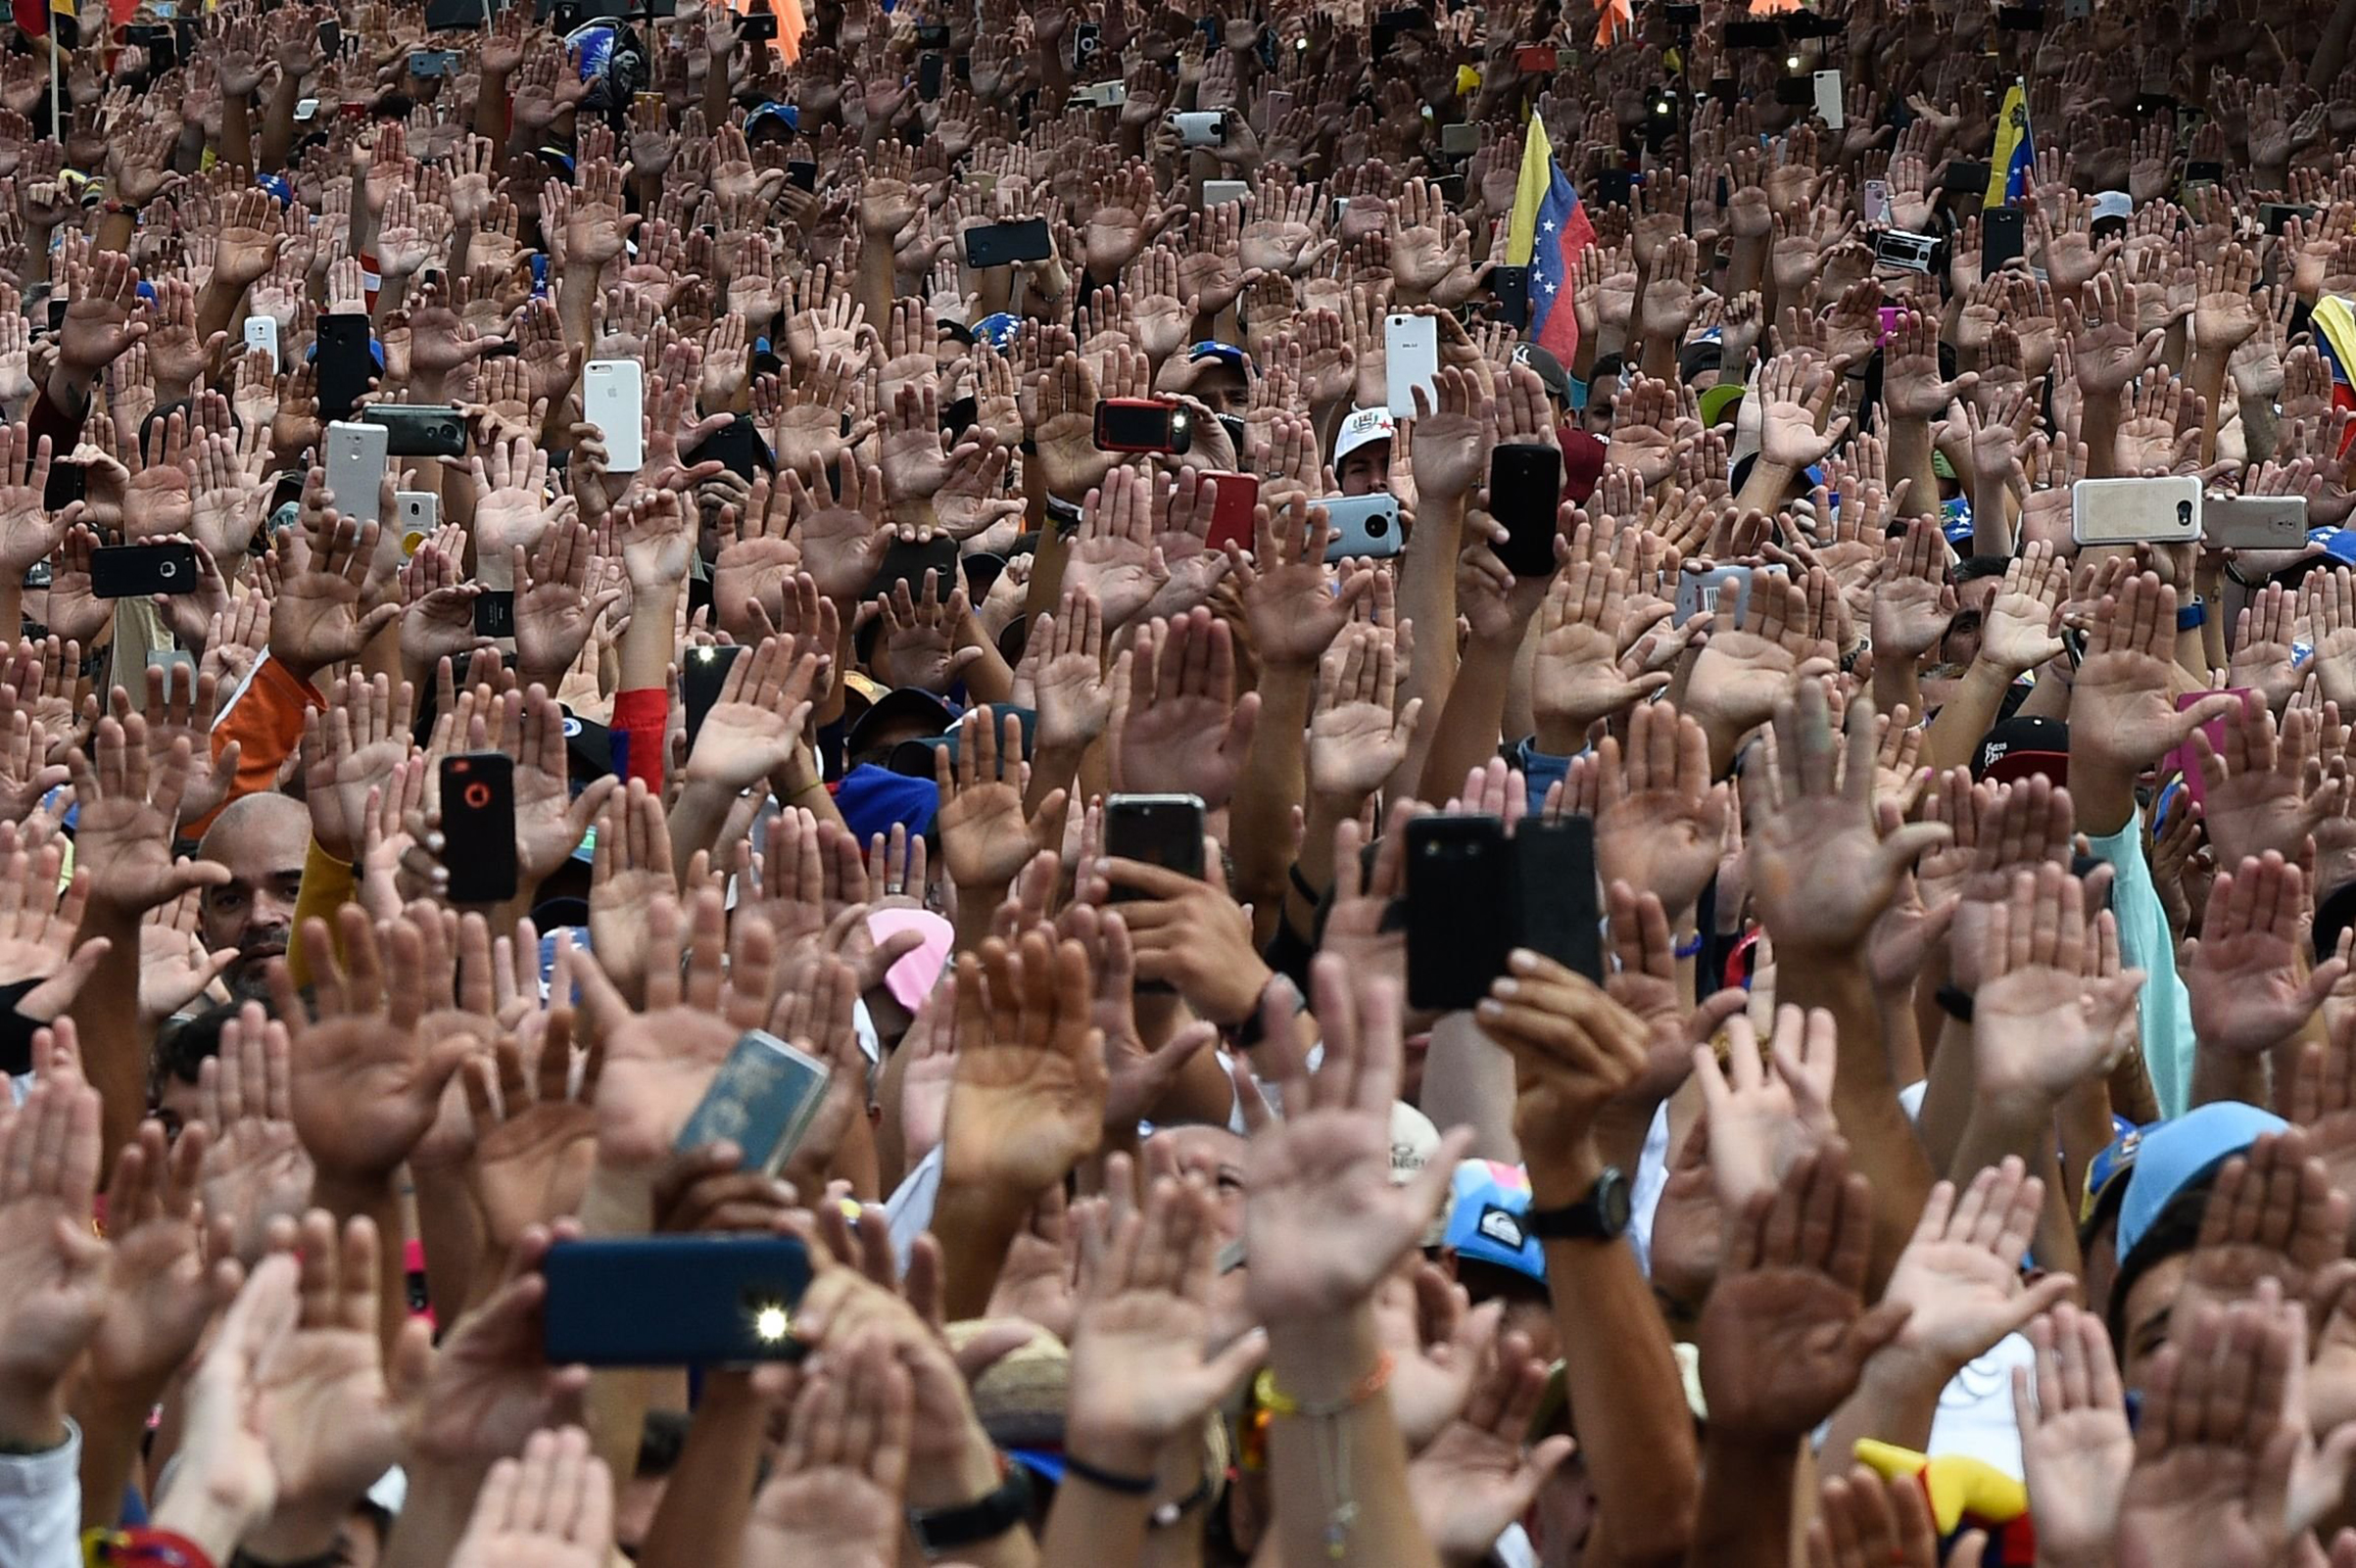 People raise their hands during a massive anti-government rally against Venezuelan President Nicolás Maduro in Caracas on Jan. 23, 2019. (Federico Parra—AFP/Getty Images)